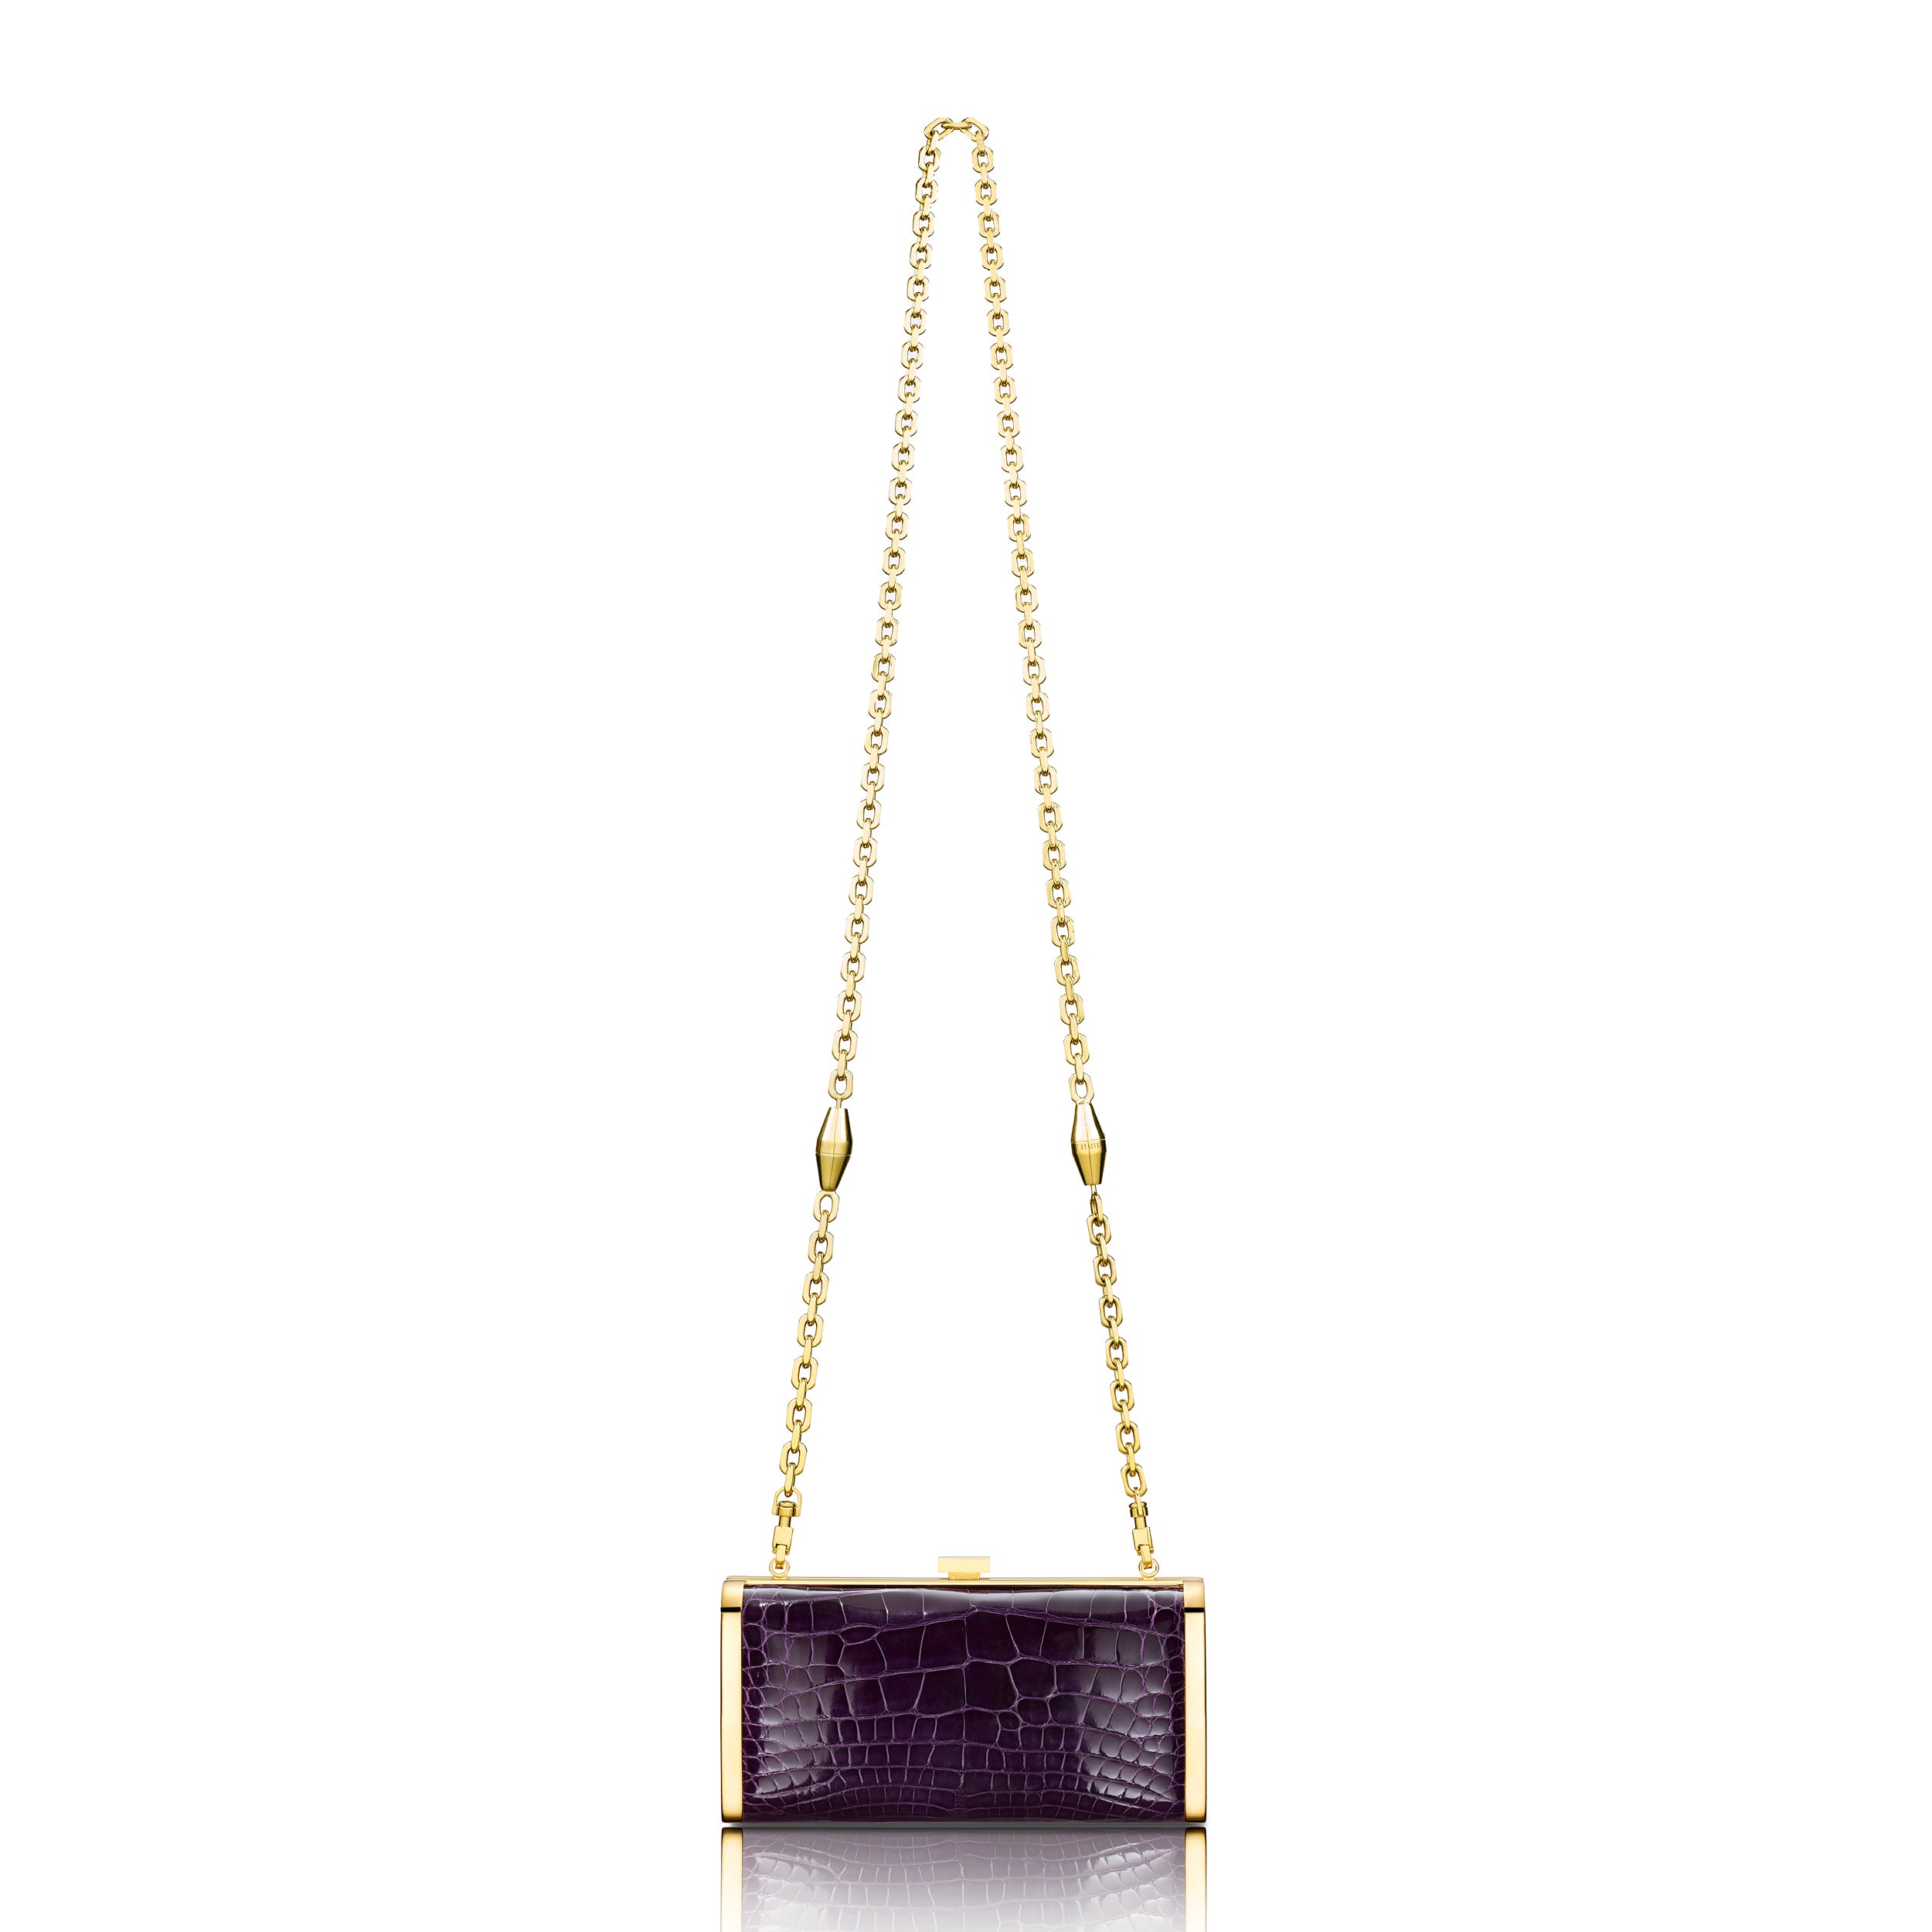 STALVEY Square Clutch in Royal Purple Alligator with 24kt Gold Hardware Front View with Chain